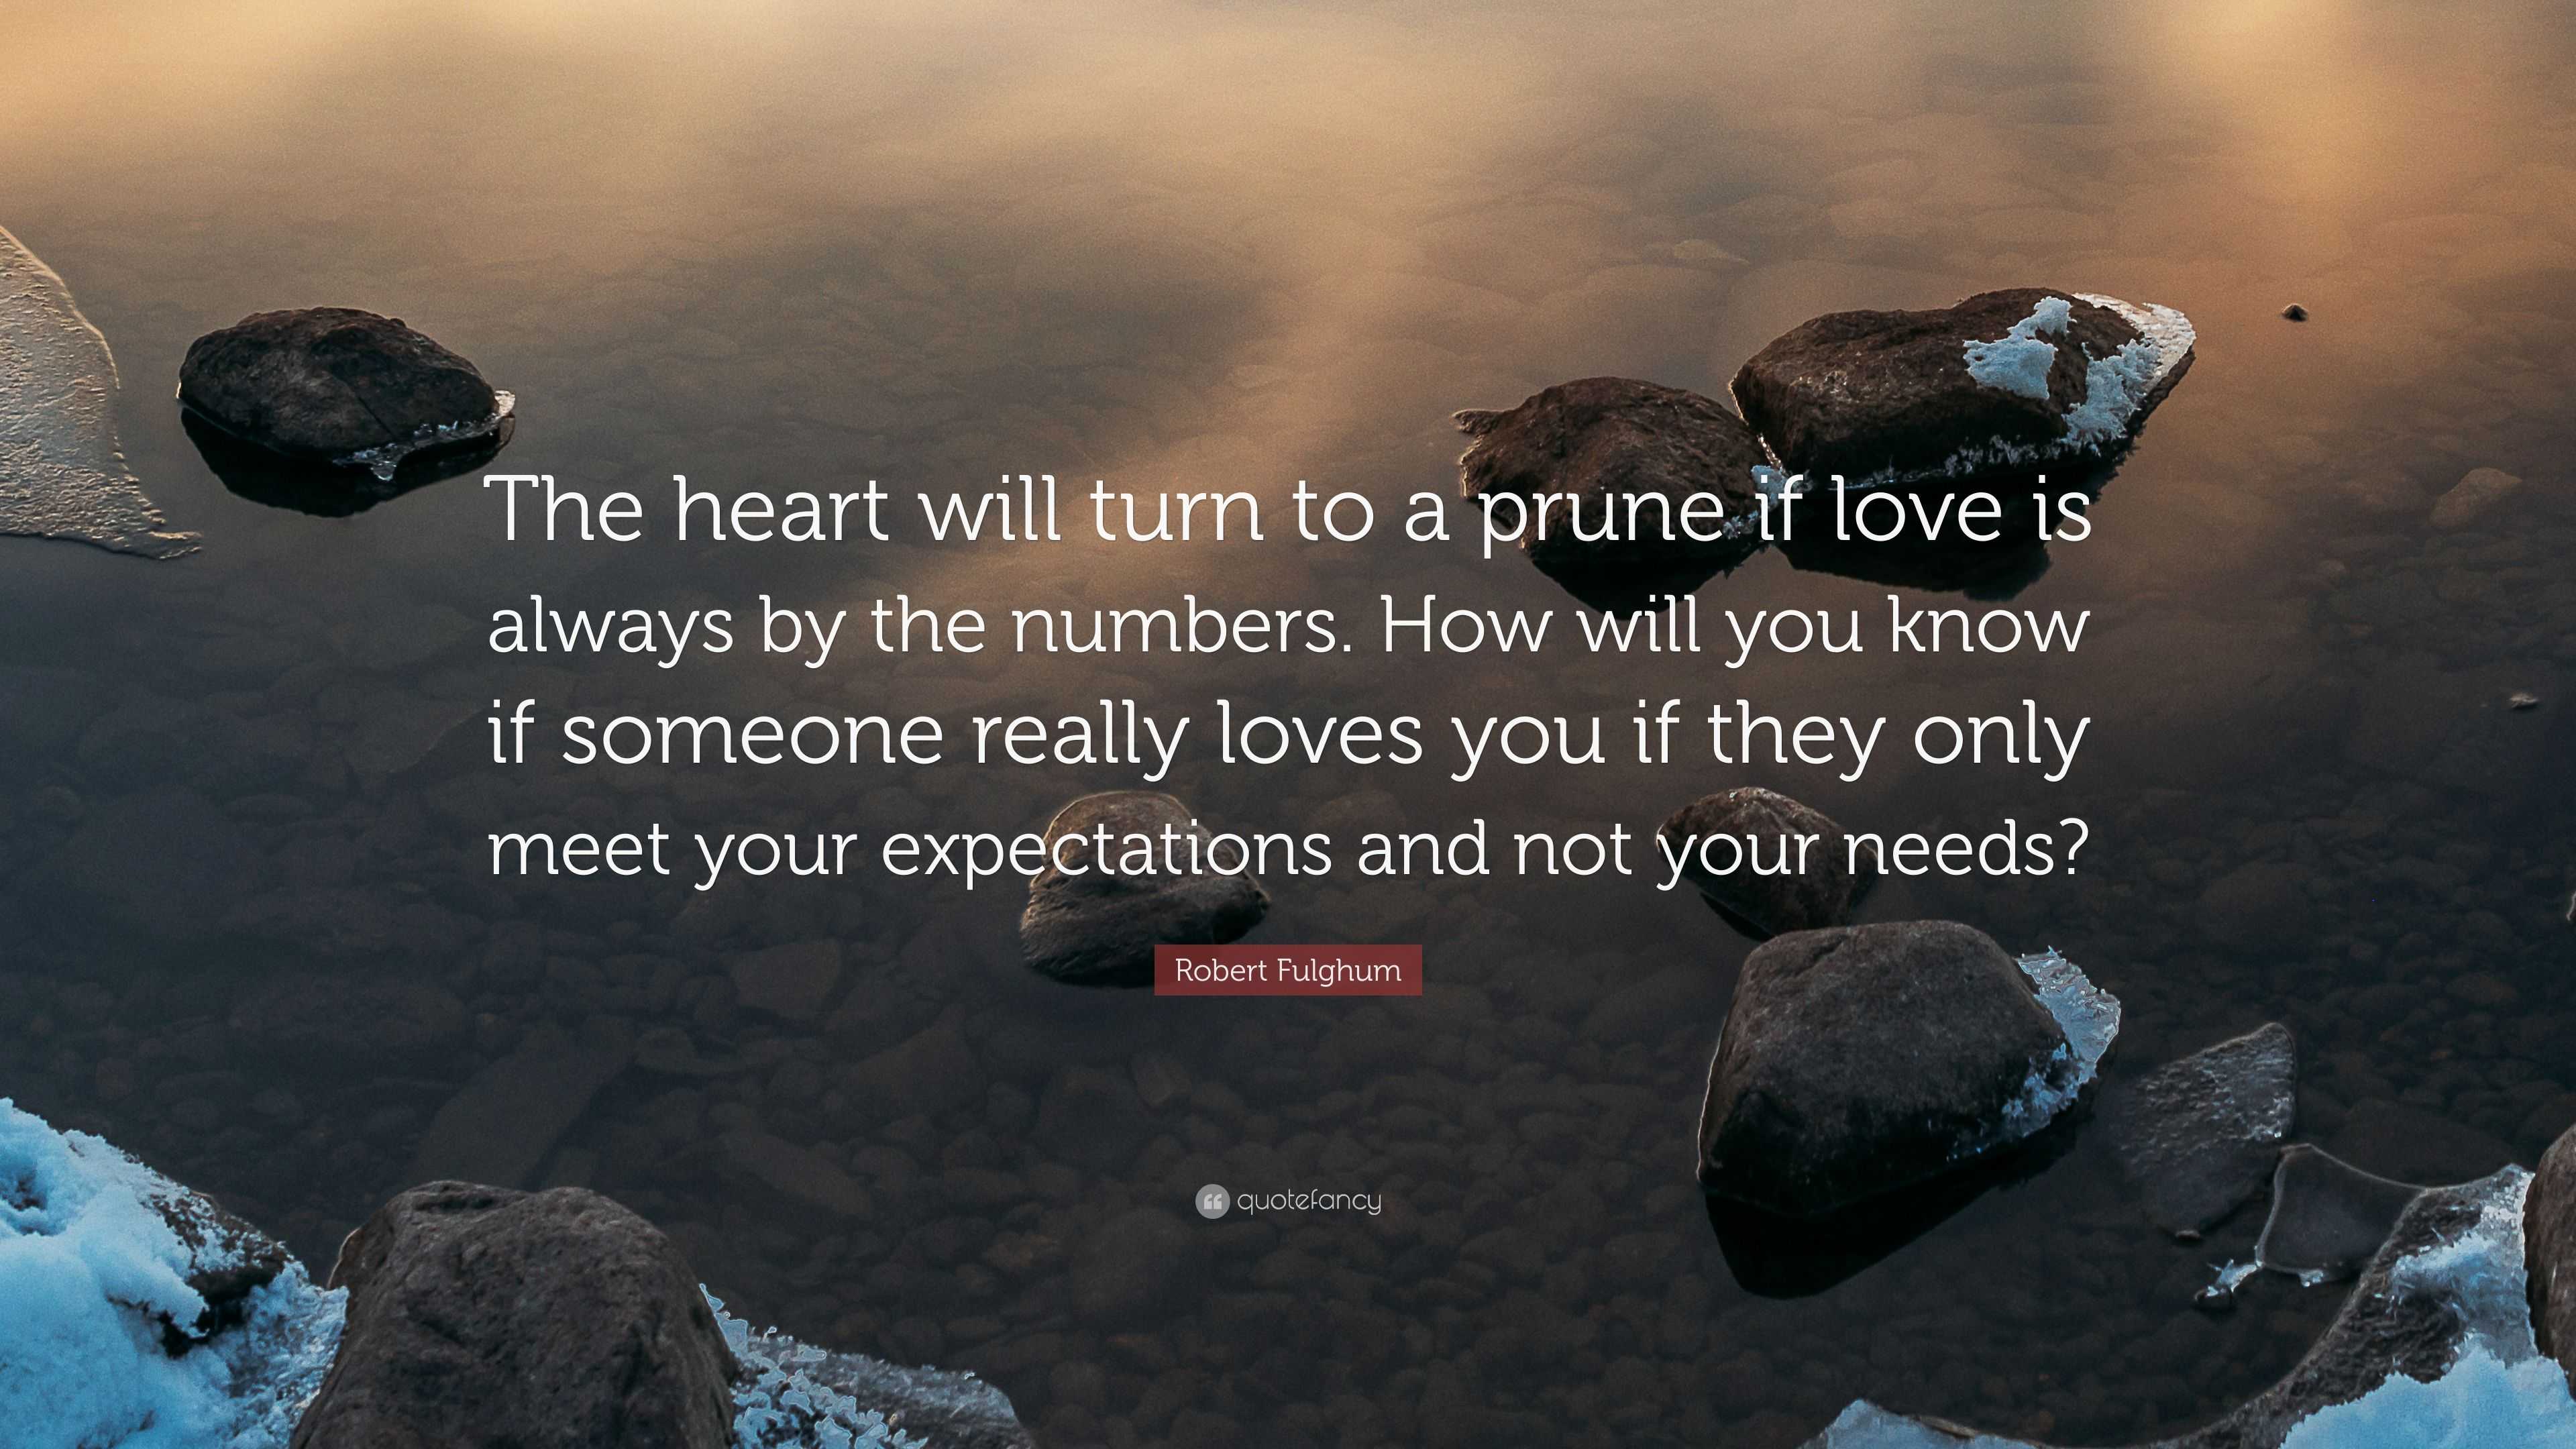 Robert Fulghum Quote “The heart will turn to a prune if love is always